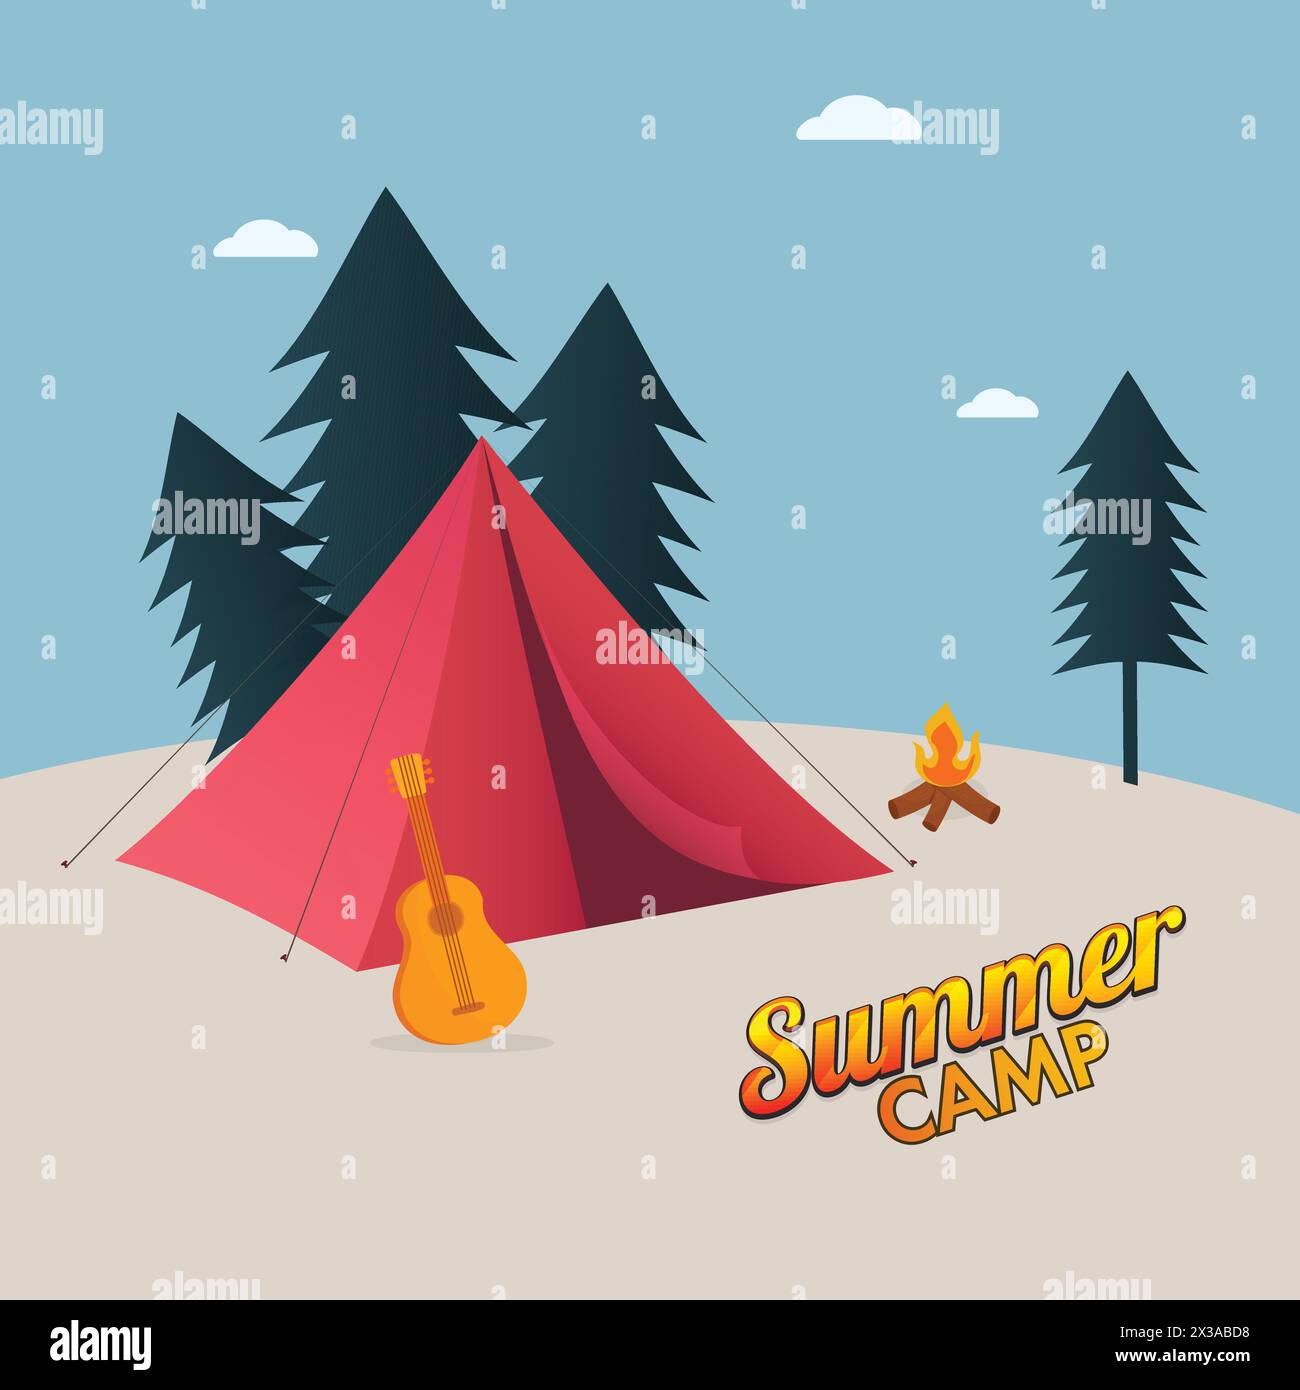 Summer Camp Concept With Red Tent, Guitar, Bonfire, Trees On Blue And ...